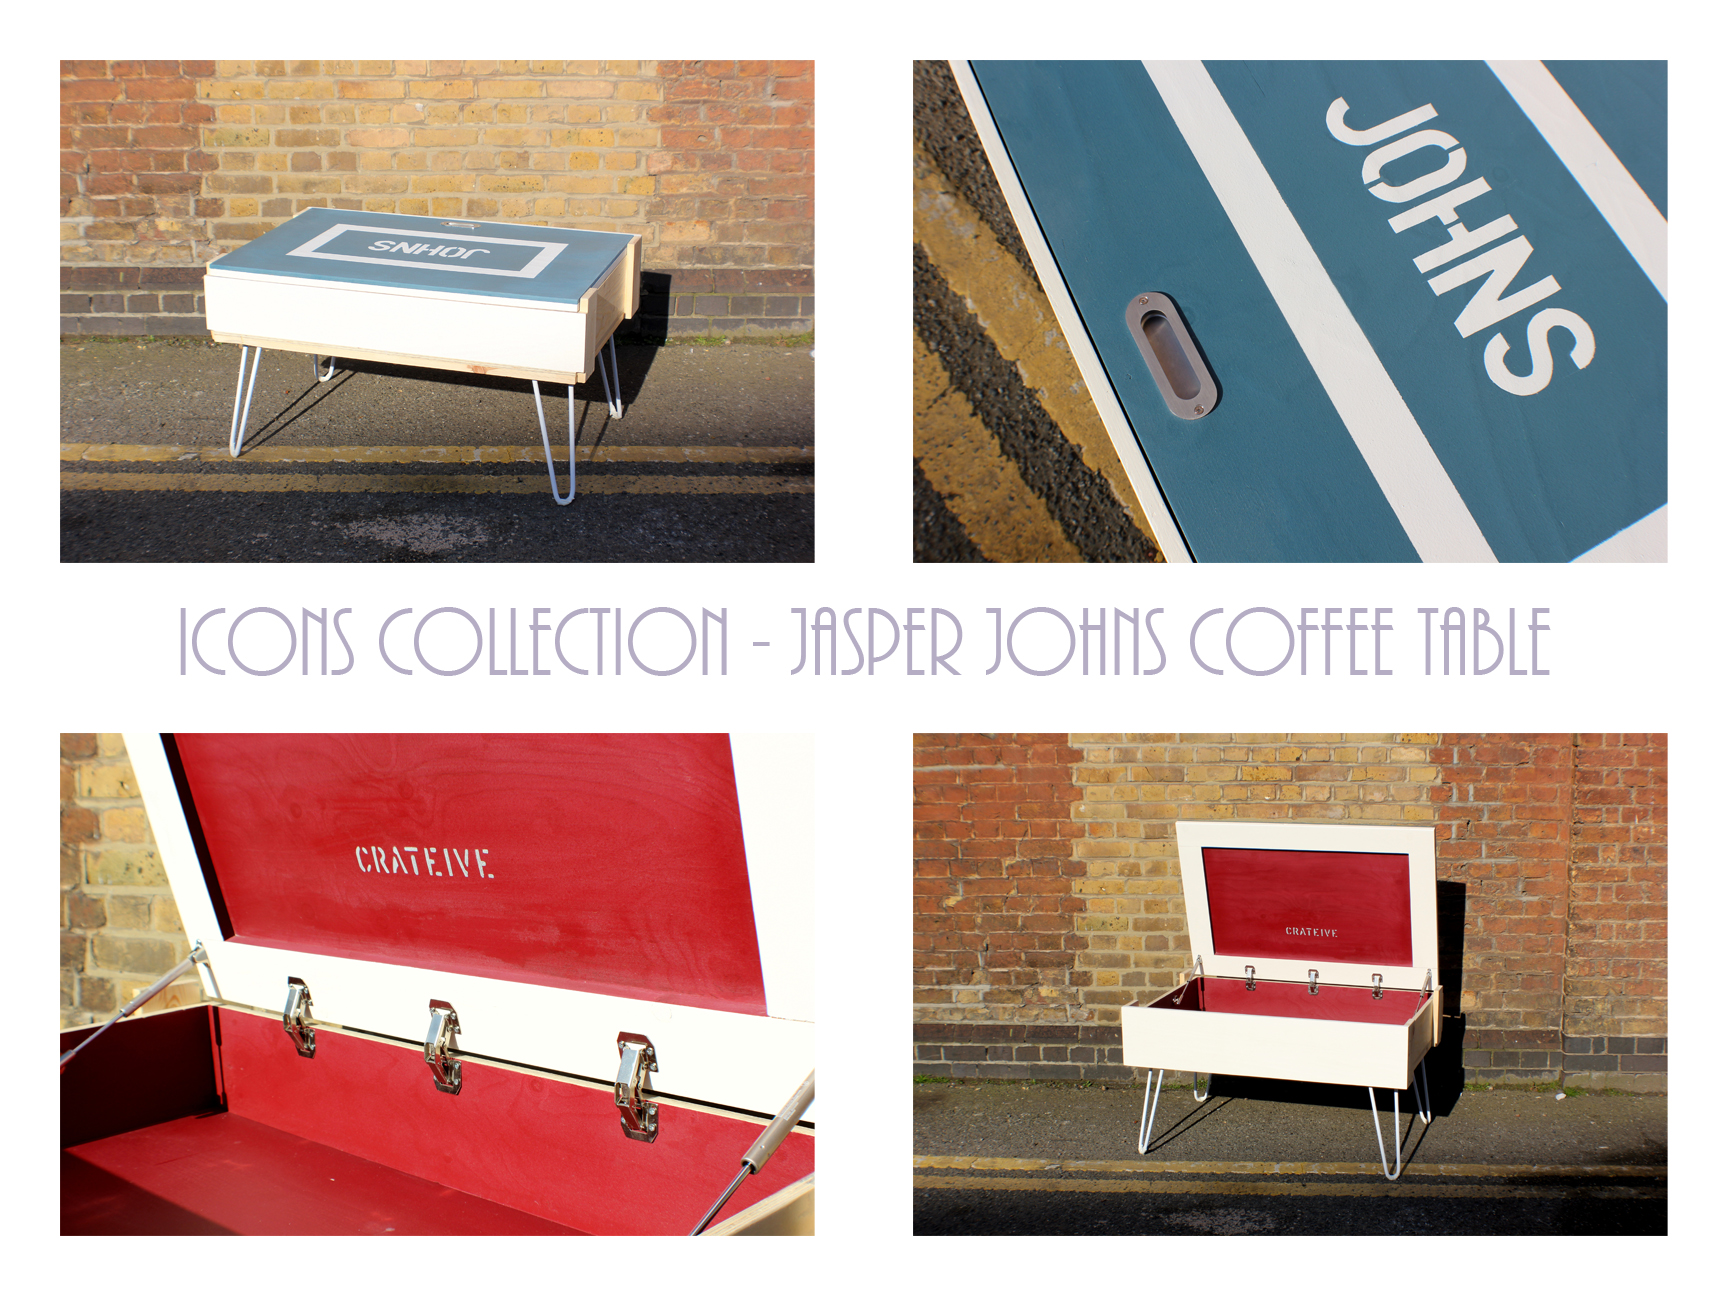 CRATEive - ICONS Collection - Jasper Johns Coffee Table